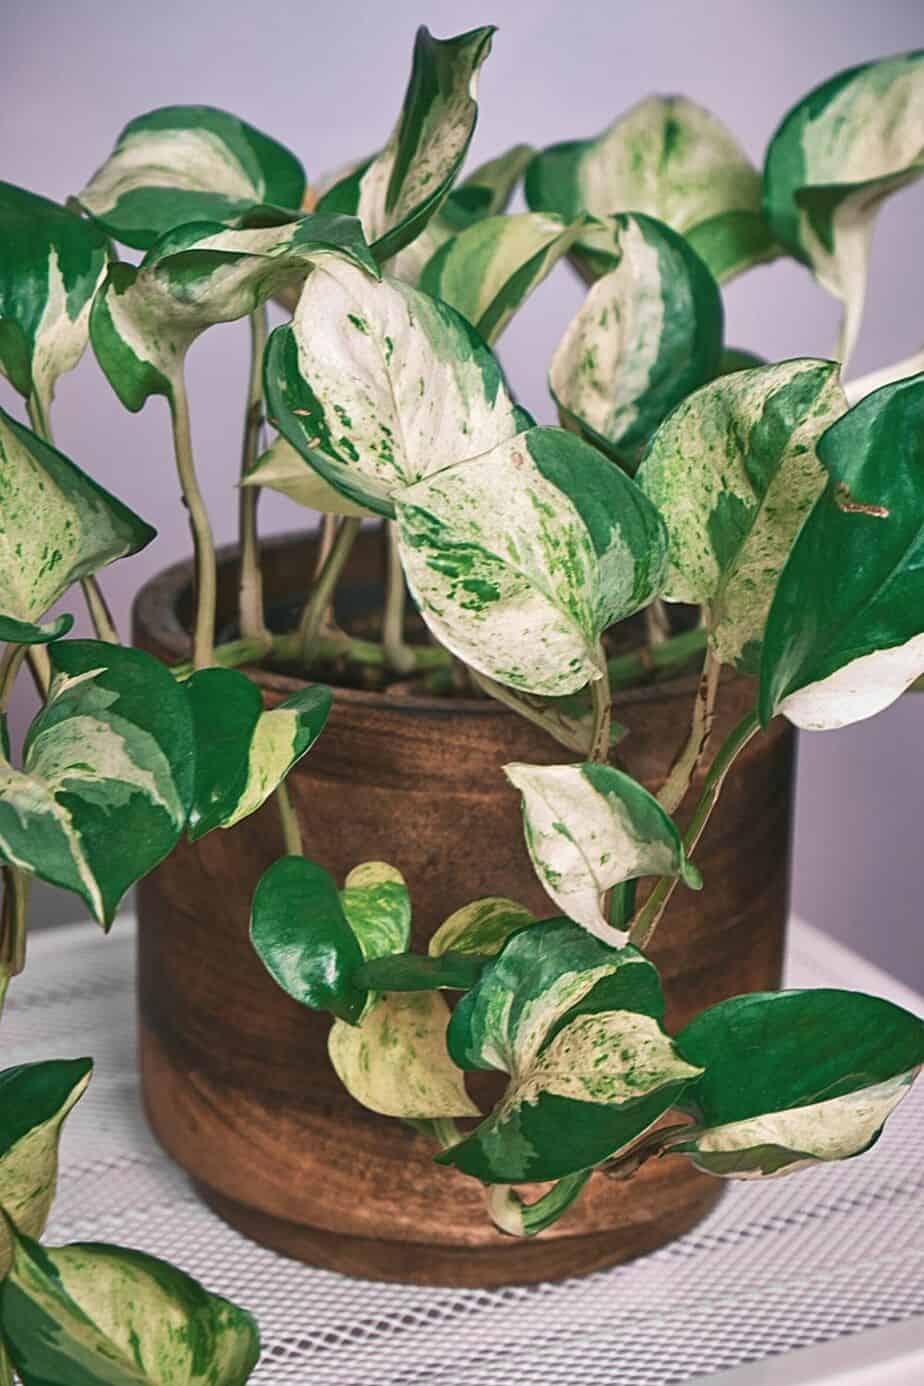 The climbing variety of the Happy Leaf Pothos is an easy plant for beginners to take care of and place by a northwest-facing window